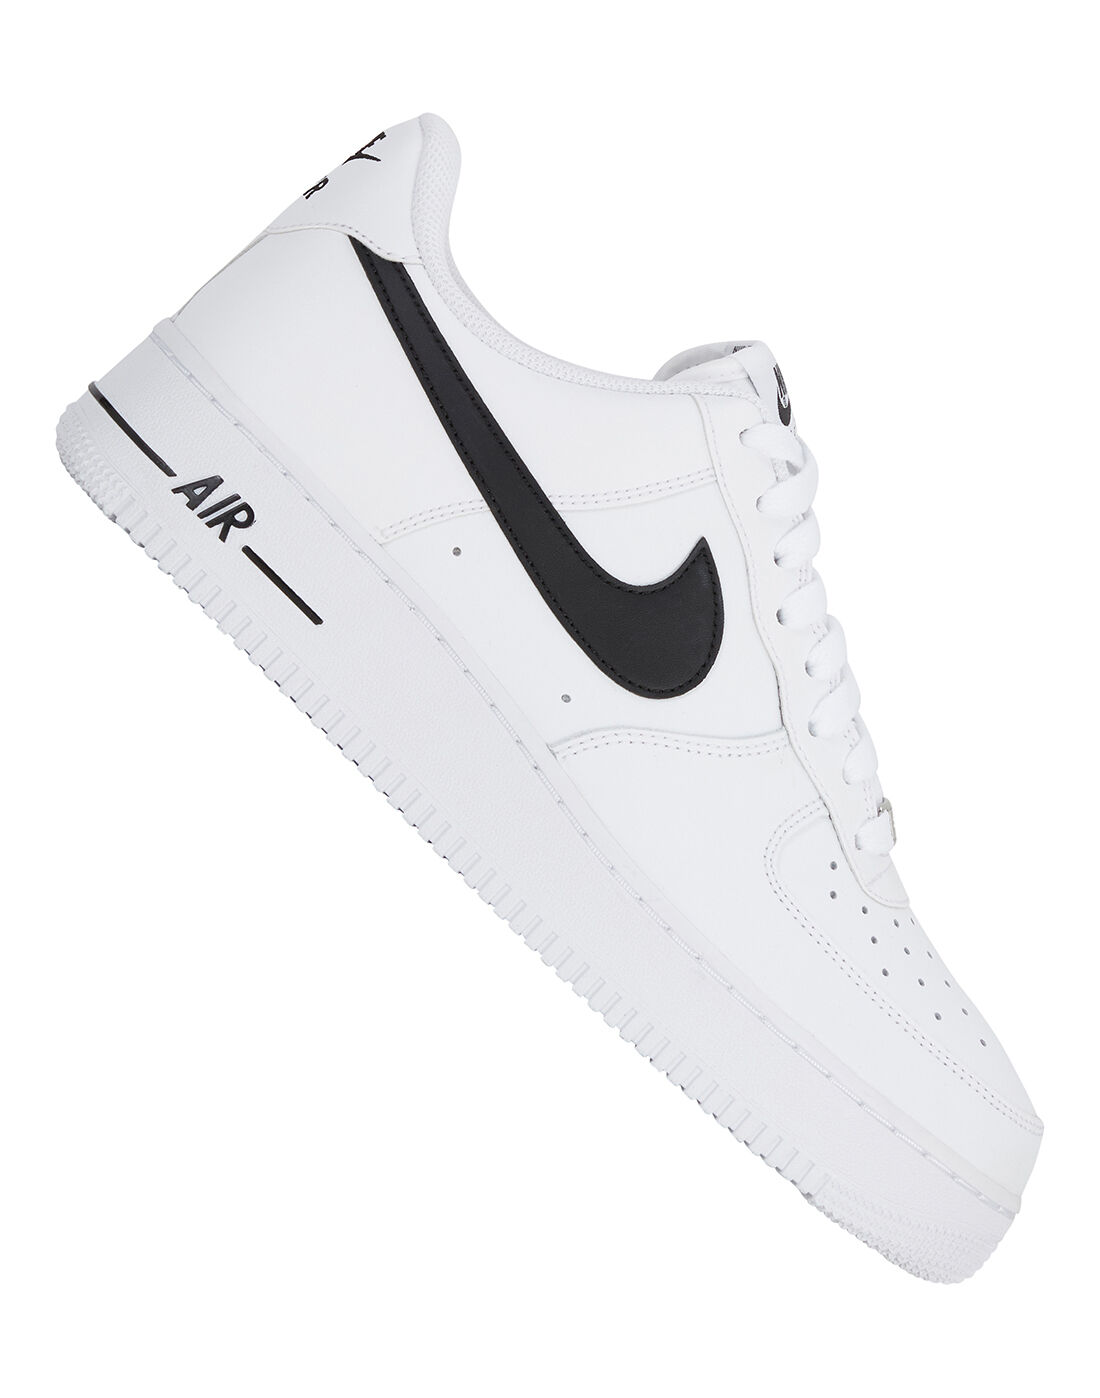 air force 1 adults